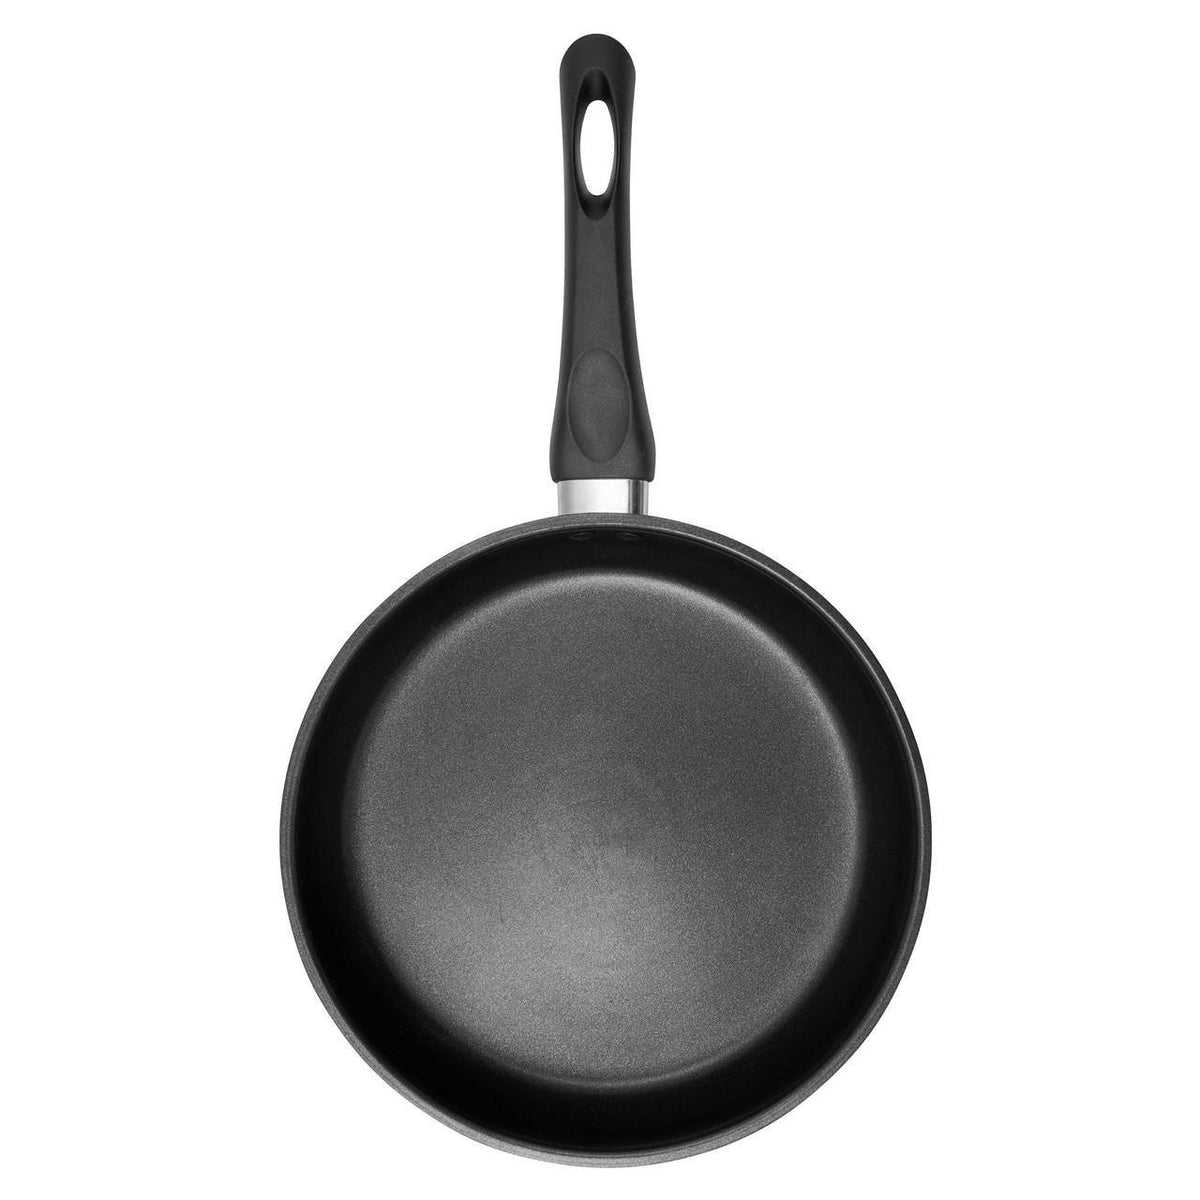 Russell Hobbs Stainless Steel Non Stick Frying Pan | 24cm